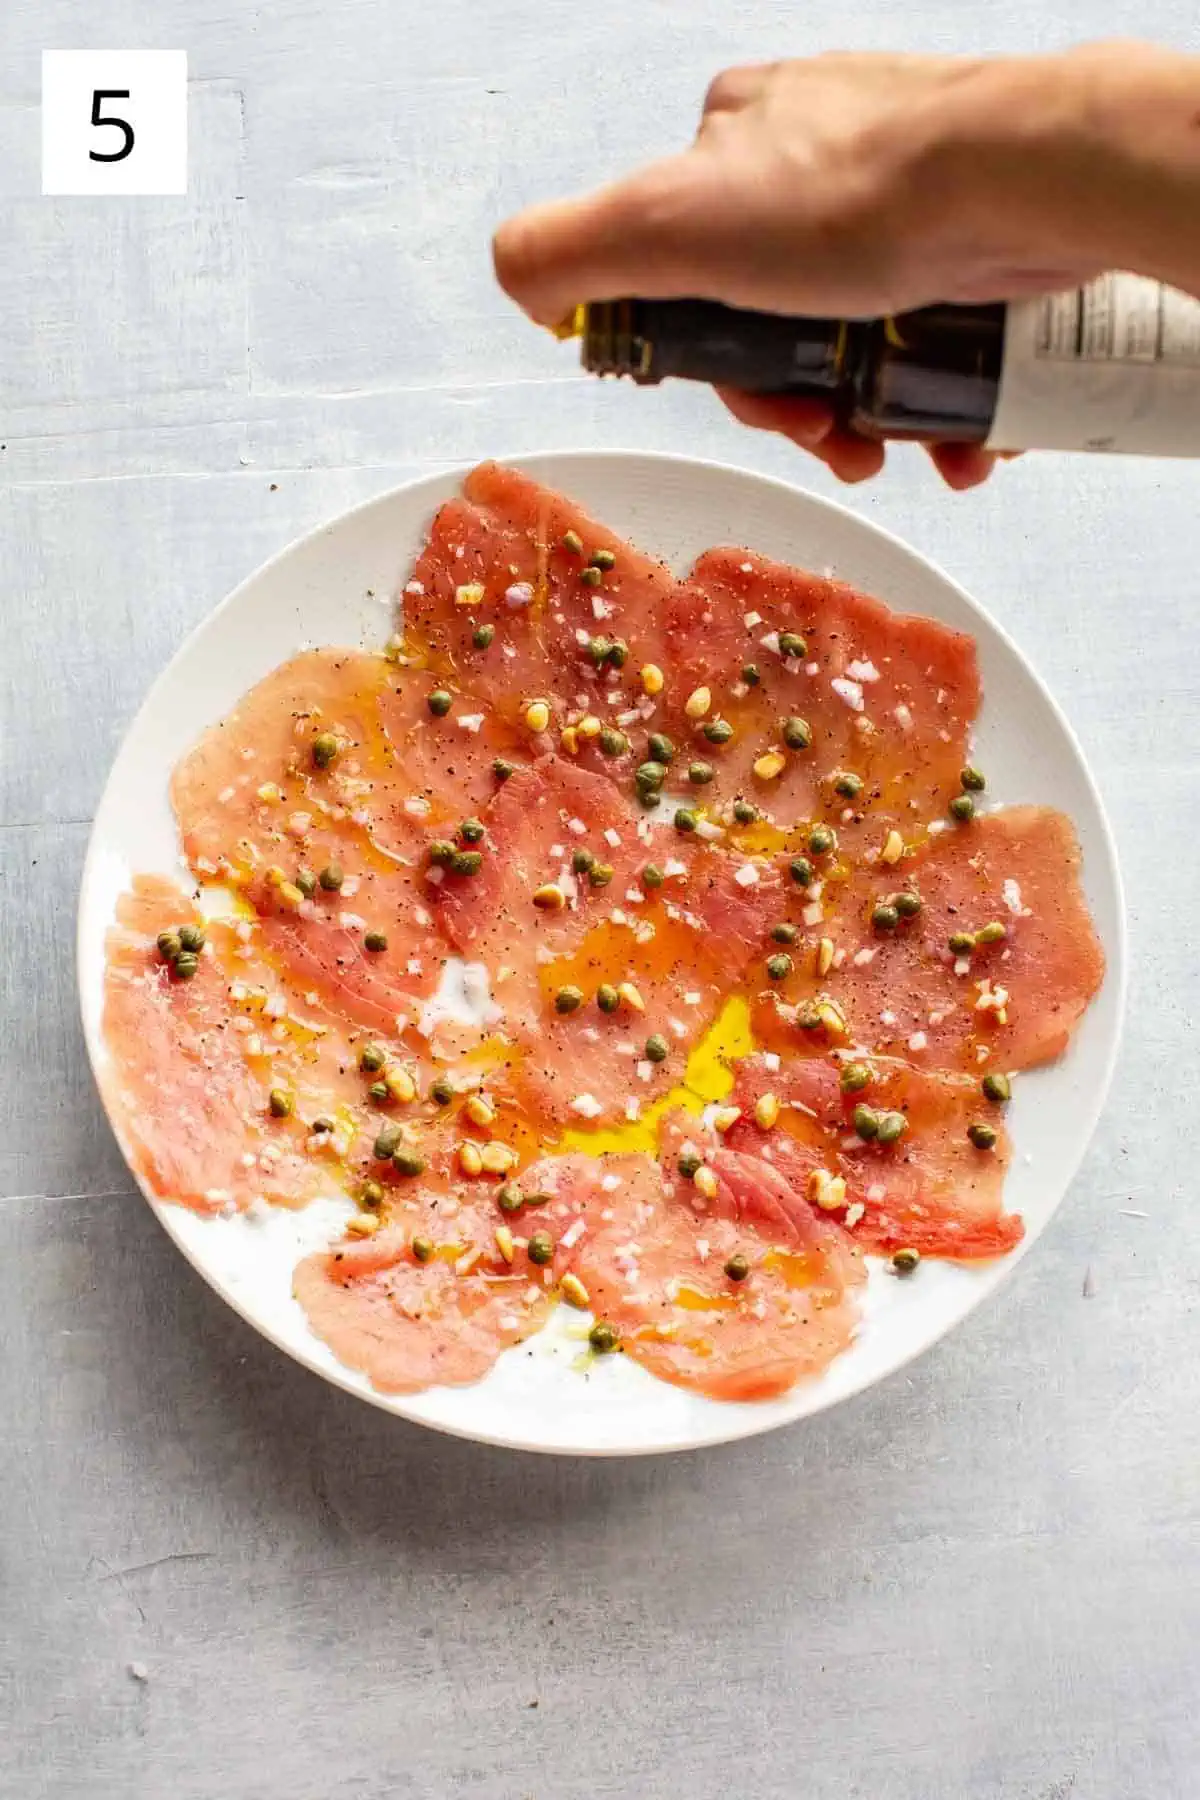 Olive oil being poured over a plate of raw tuna with capers, pine nuts and shallots.